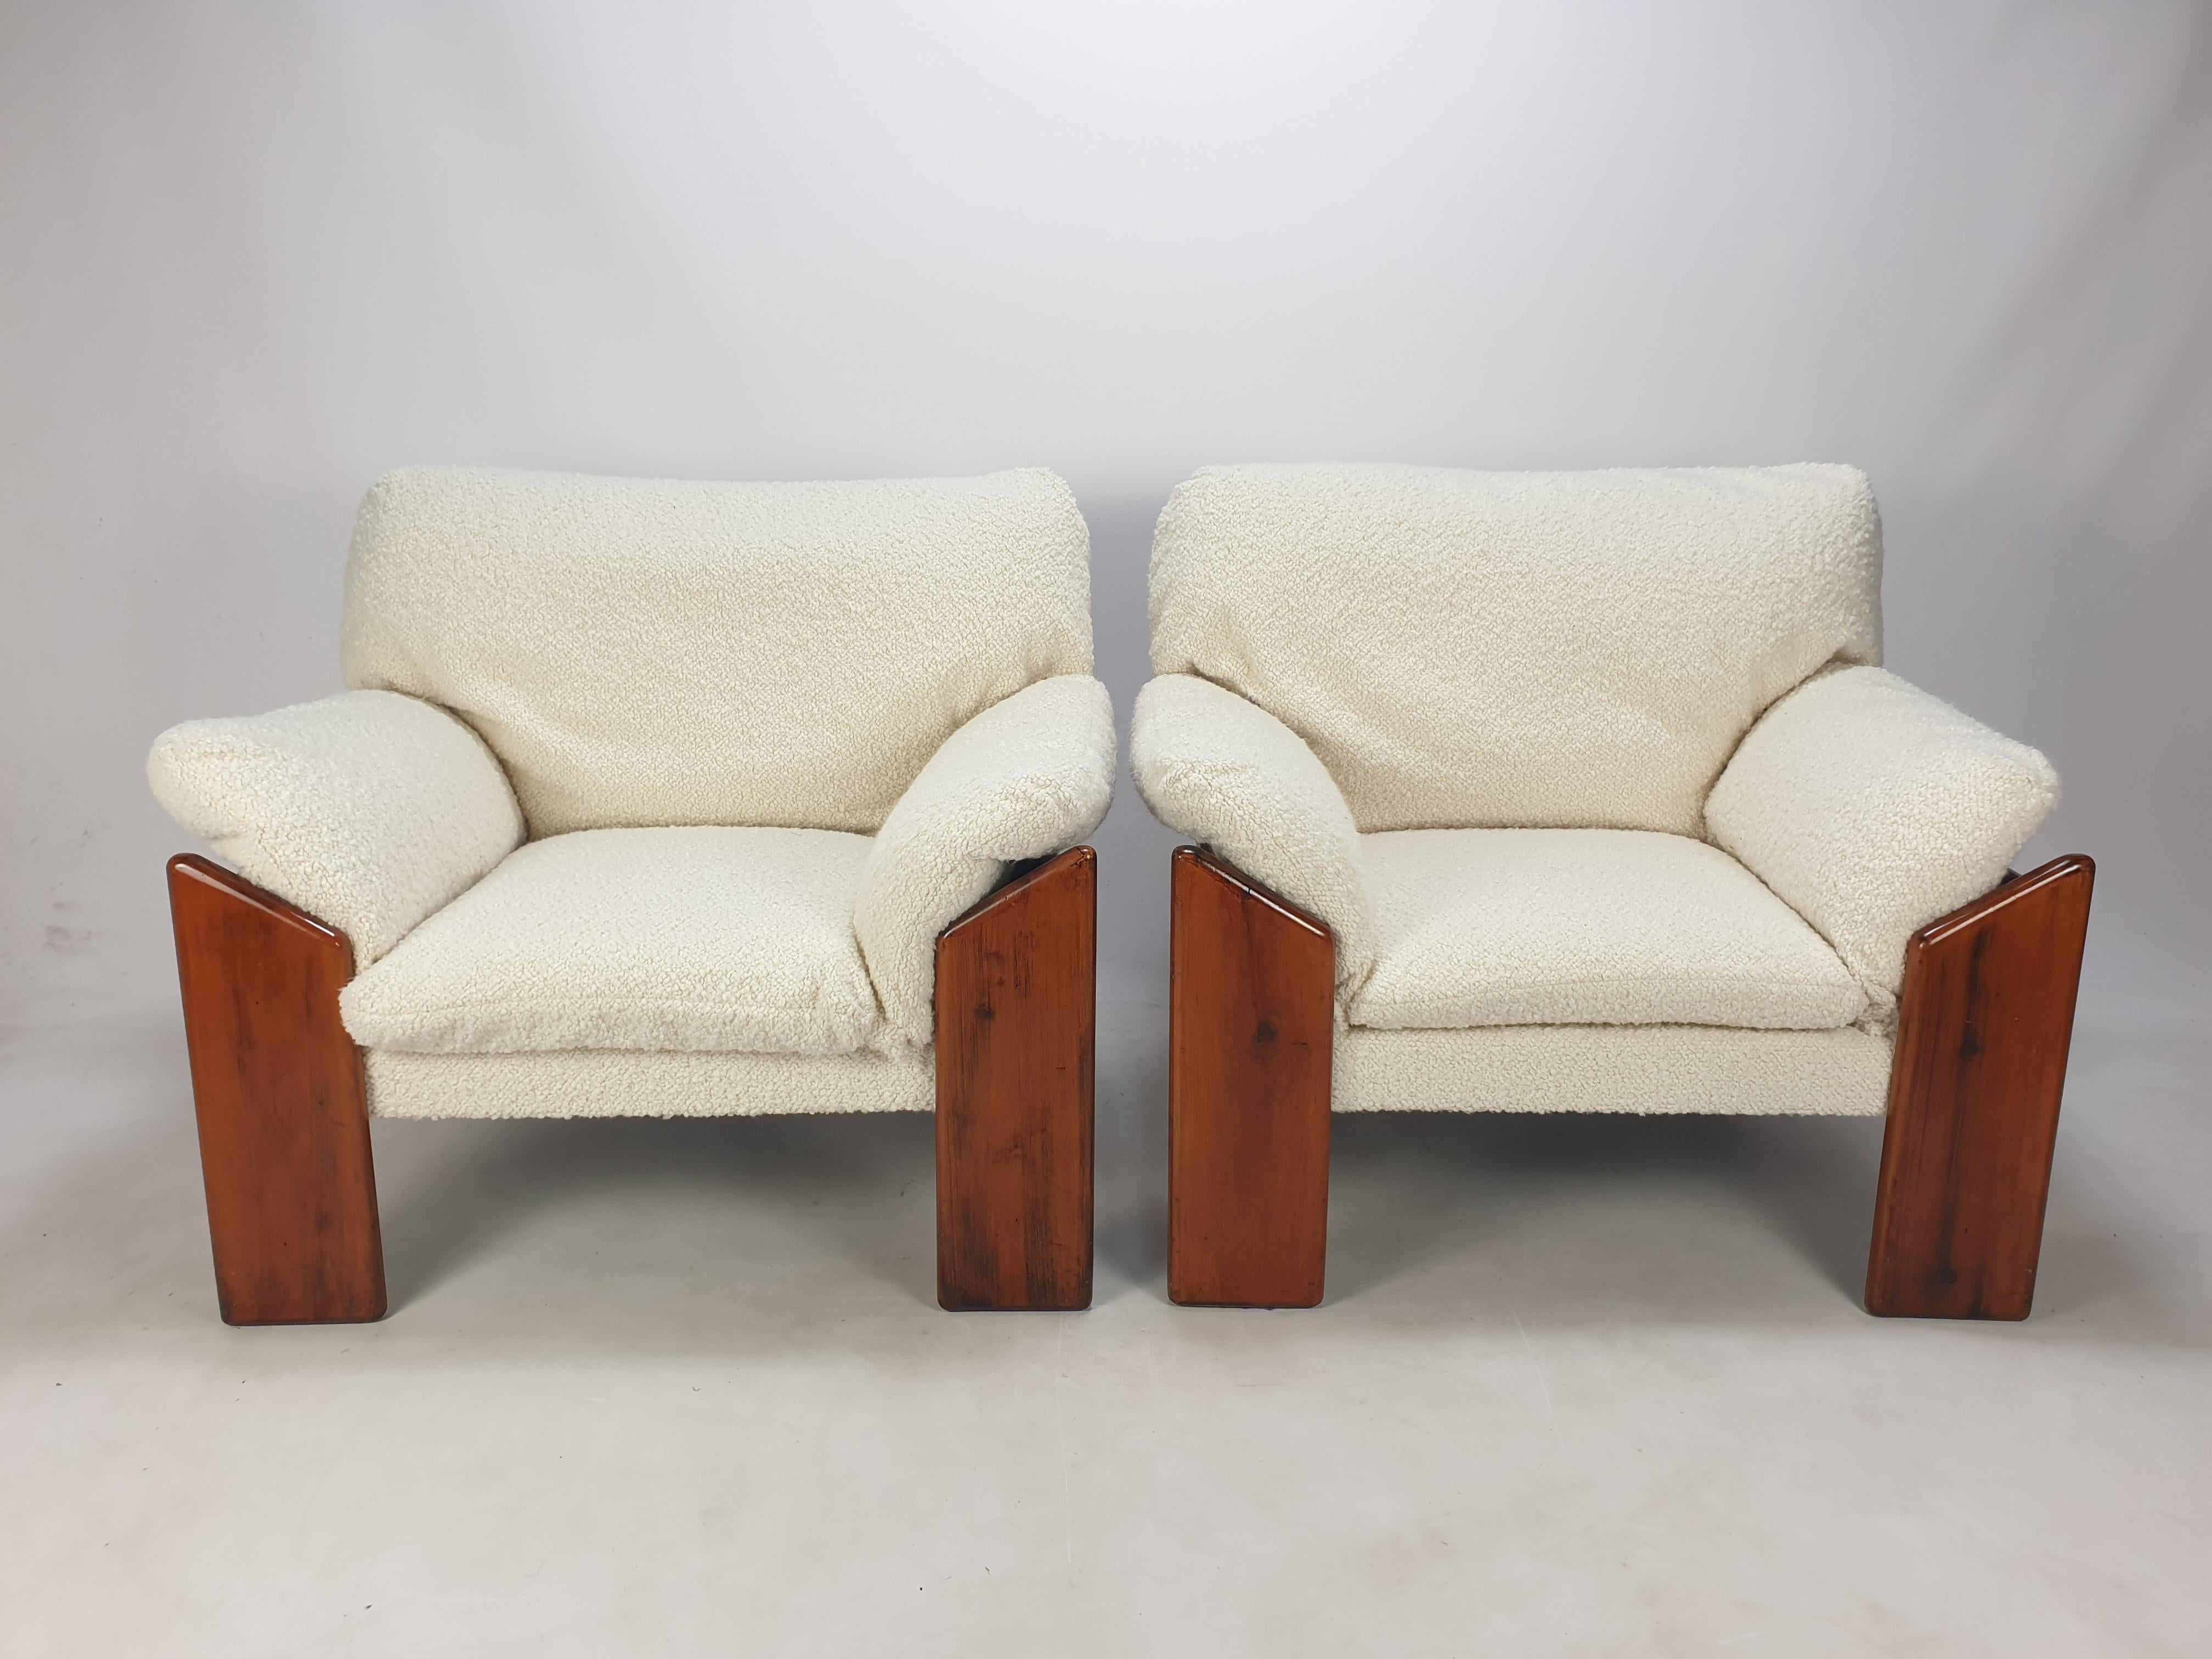 A beautiful set of 2 walnut chairs, designed by Mario Marenco for Mobil Girgi, Italy 1970's.

Beautifully designed with angled front legs which extend to the sides and back, the back support is slightly curved. 
The rich grain of the wood